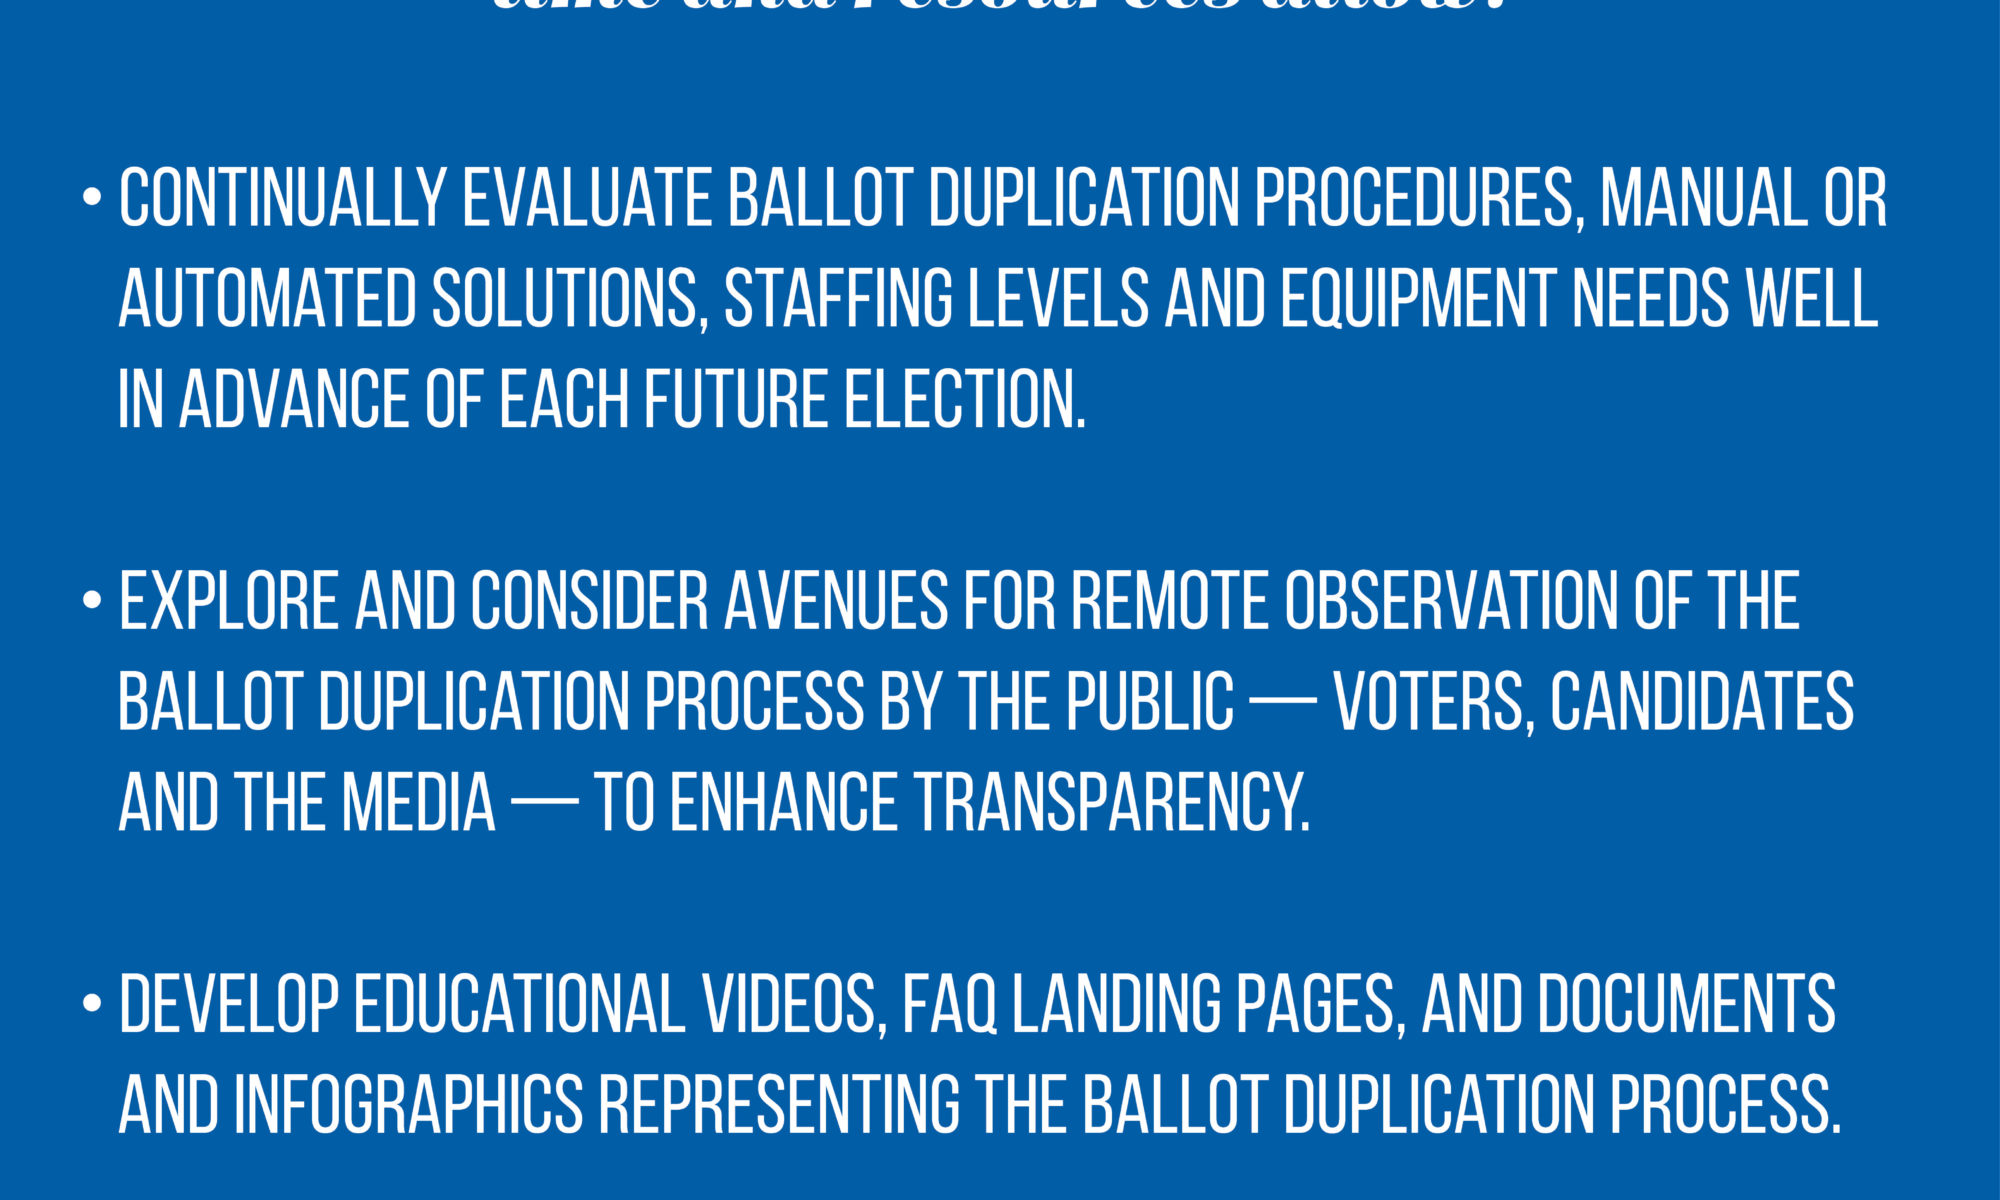 Ballot Duplication Recommendations: Recommendations are in text